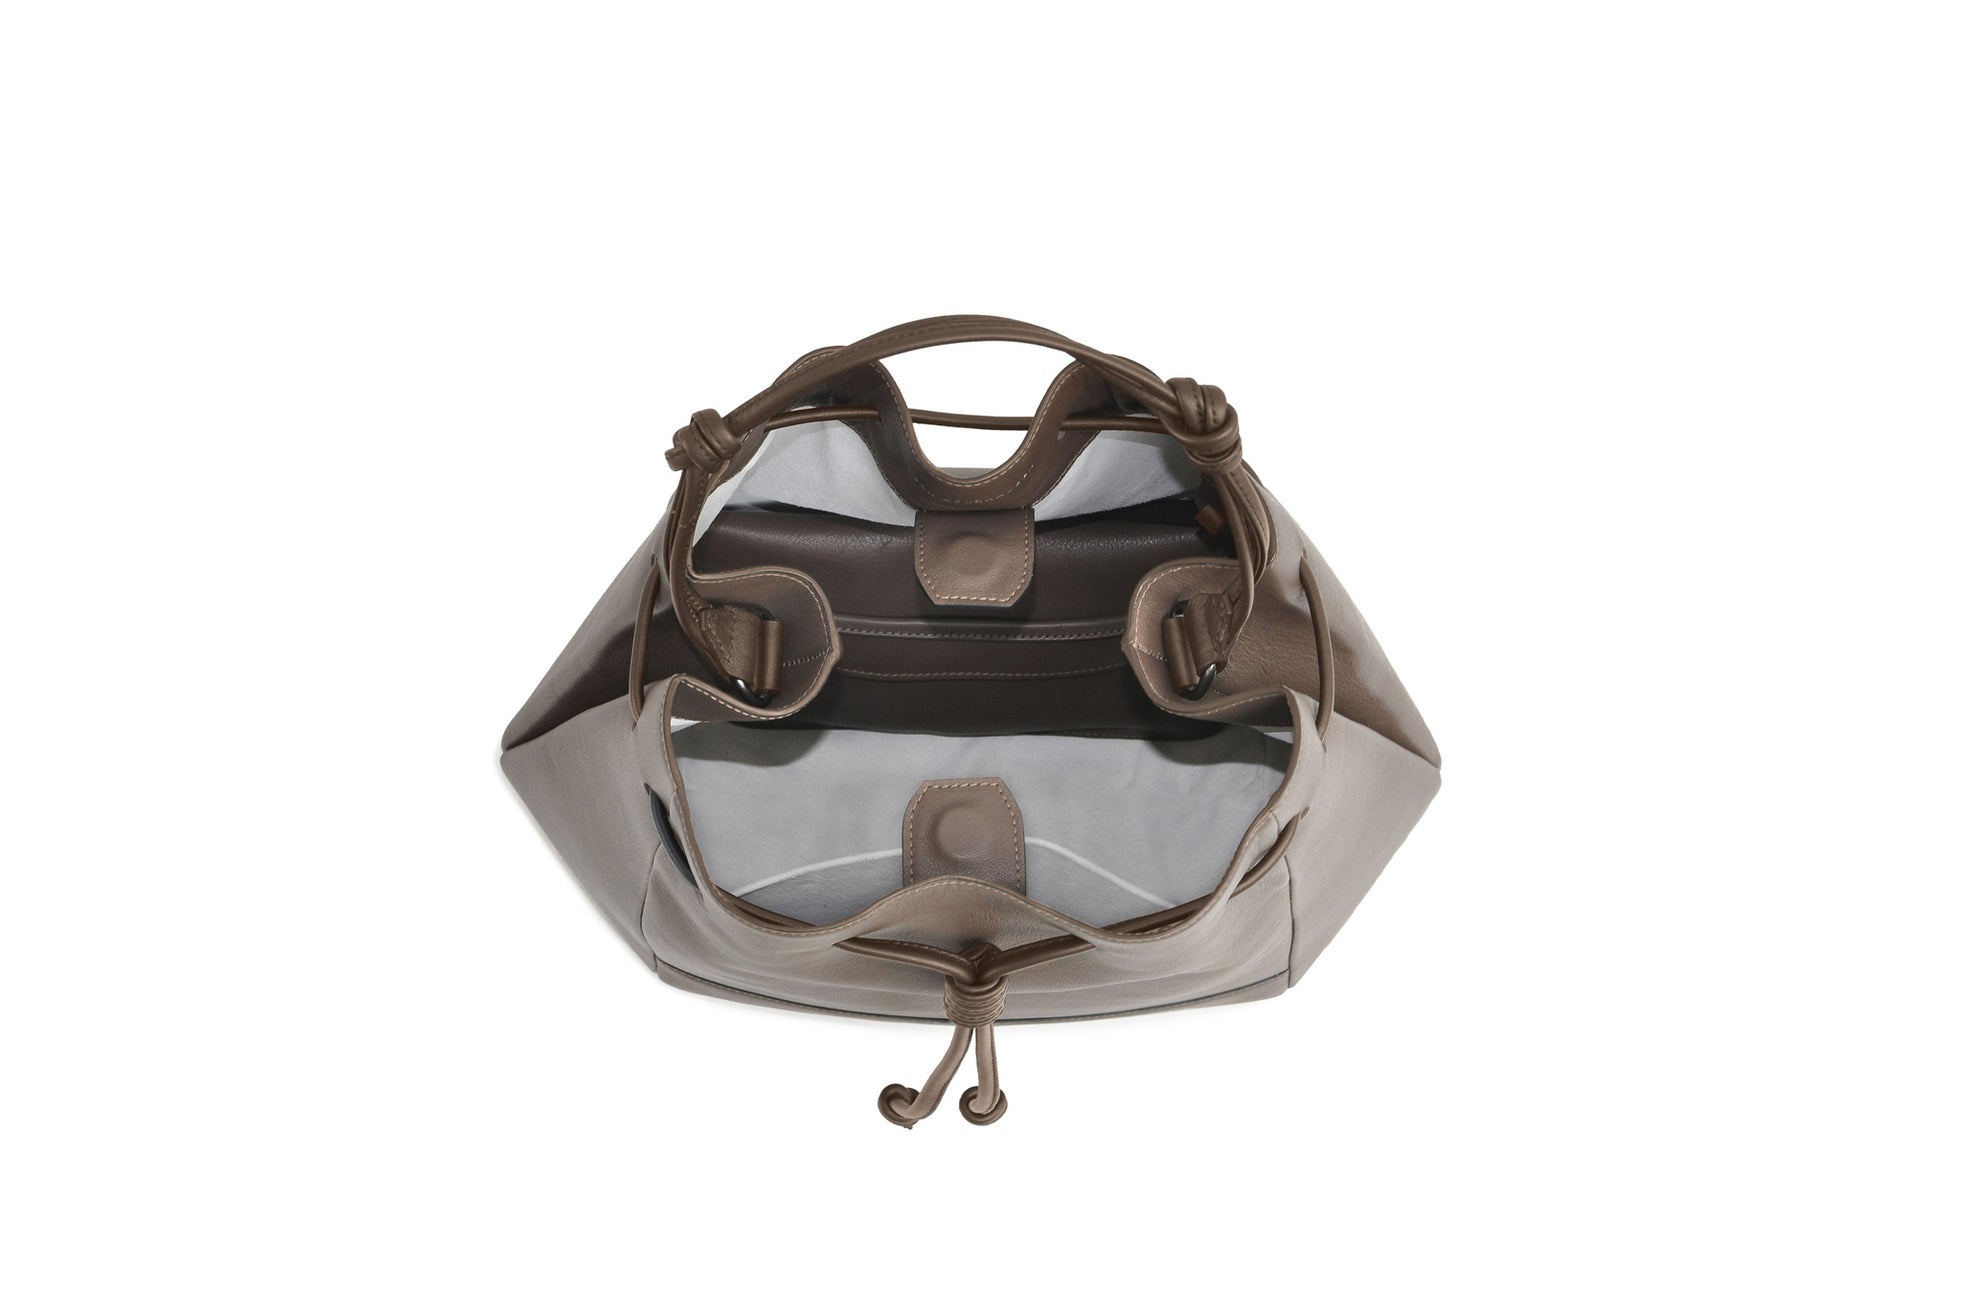 The Large Bucket Backpack in Technik in Taupe image 